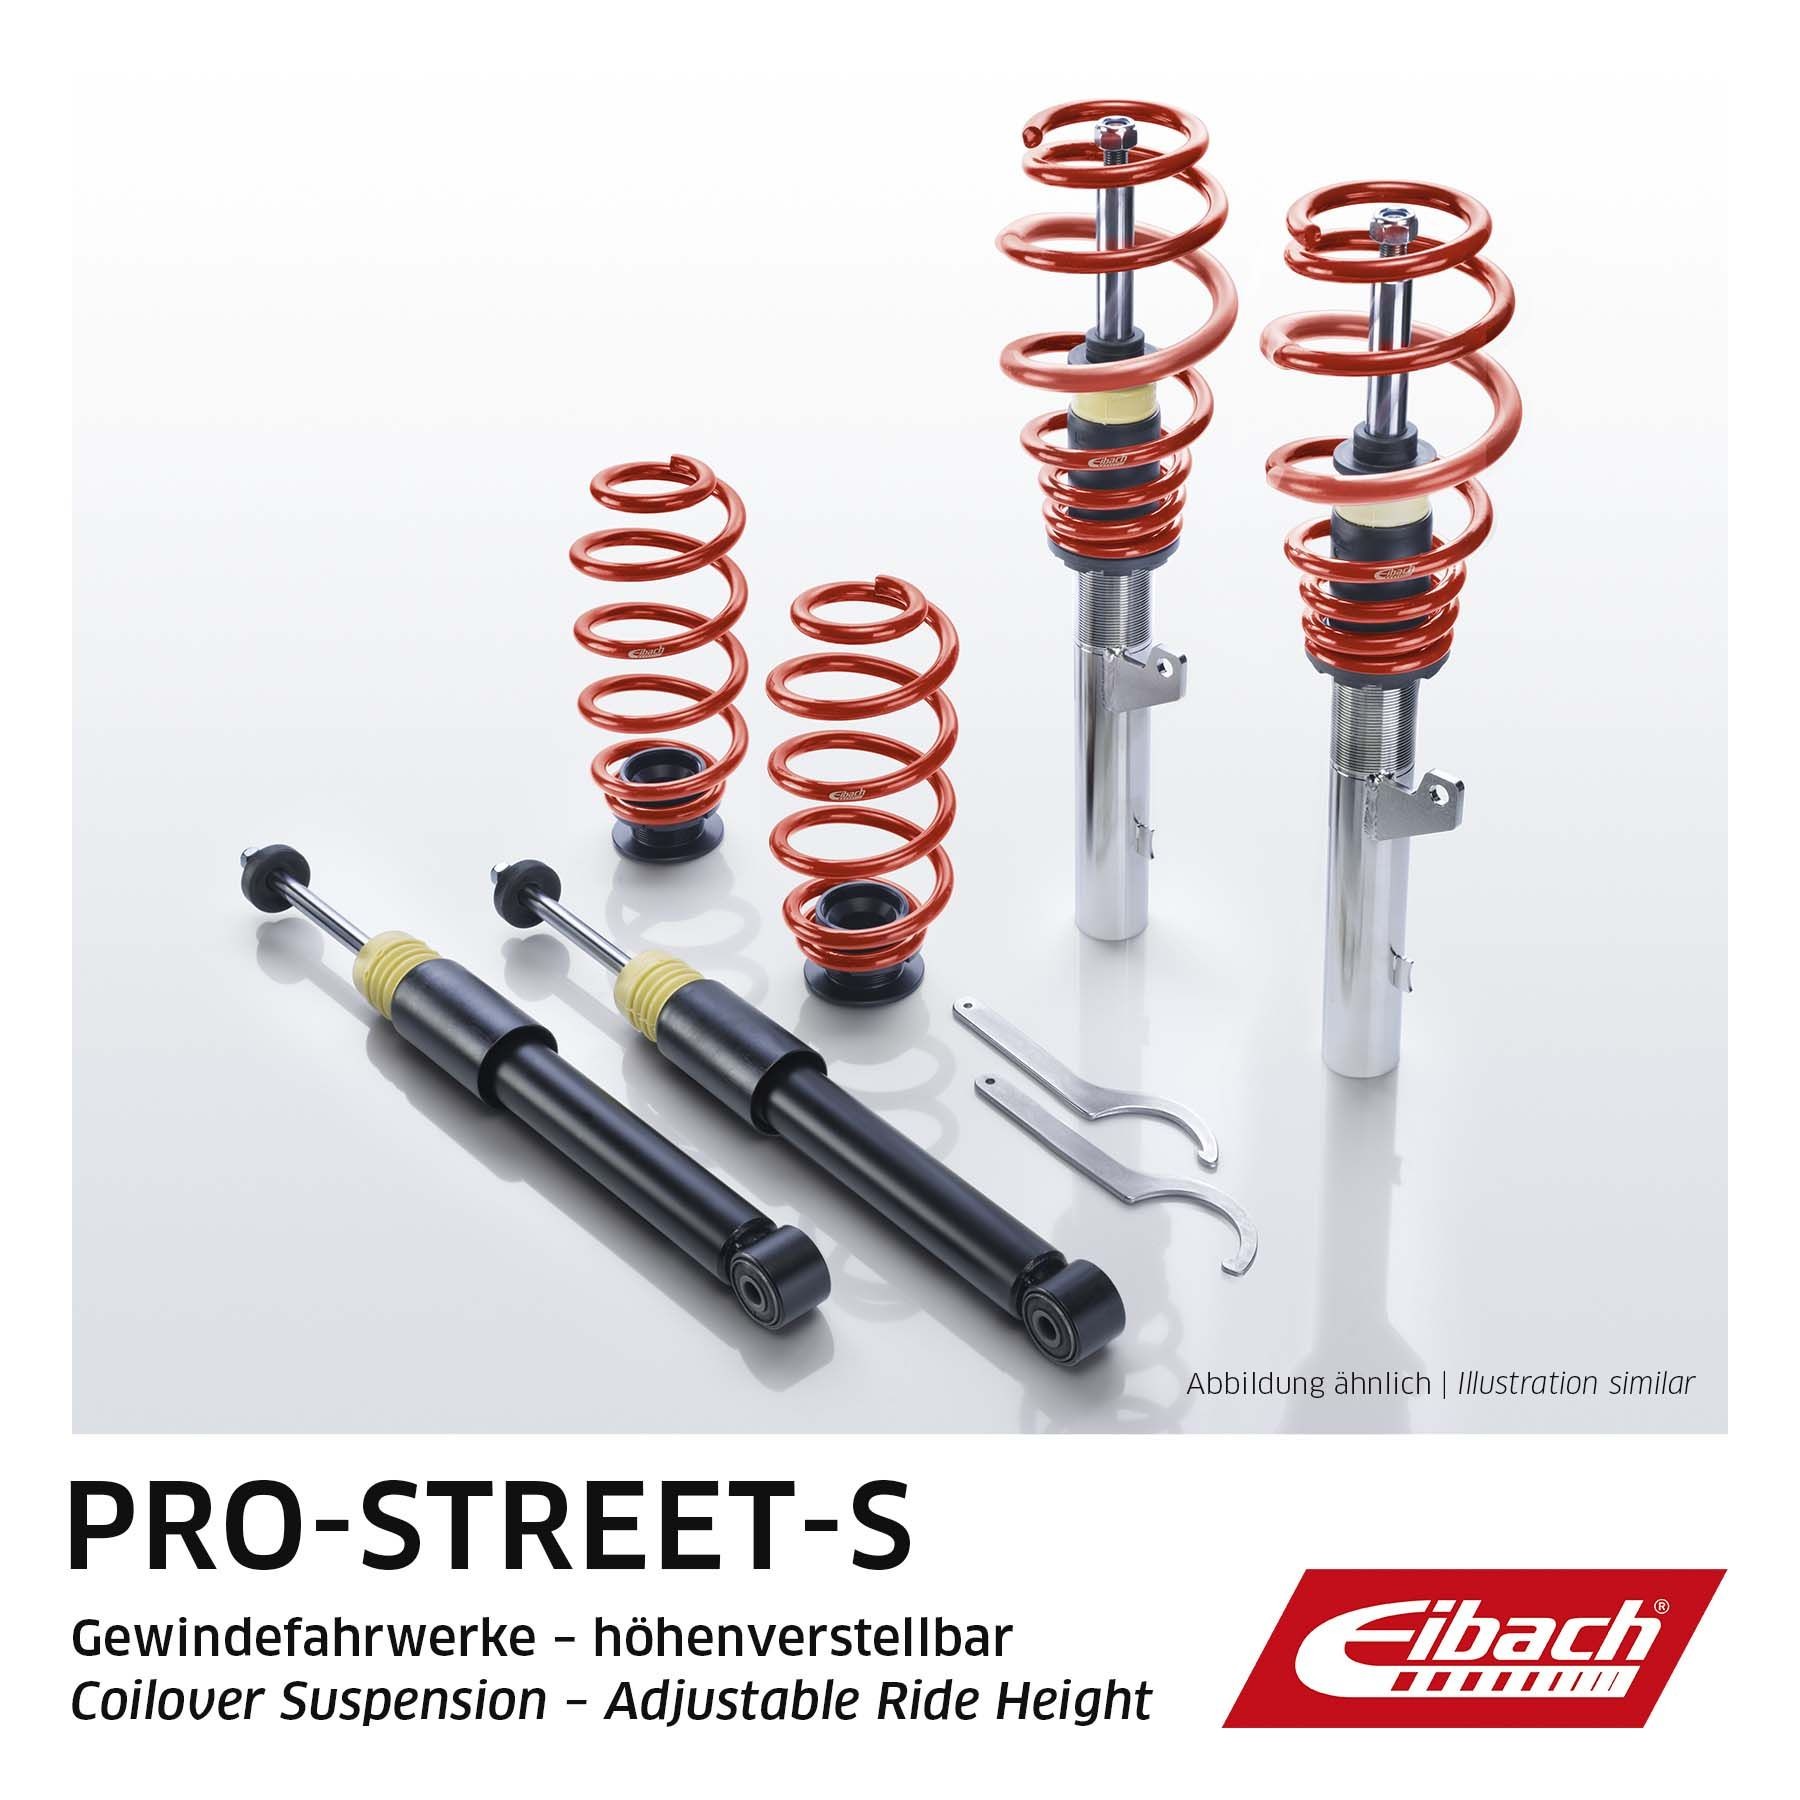 65200110122 EIBACH Pro-Street-S PSS65200110122 Suspension kit, coil springs / shock absorbers BMW E60 520i 2.0 163 hp Petrol 2007 price